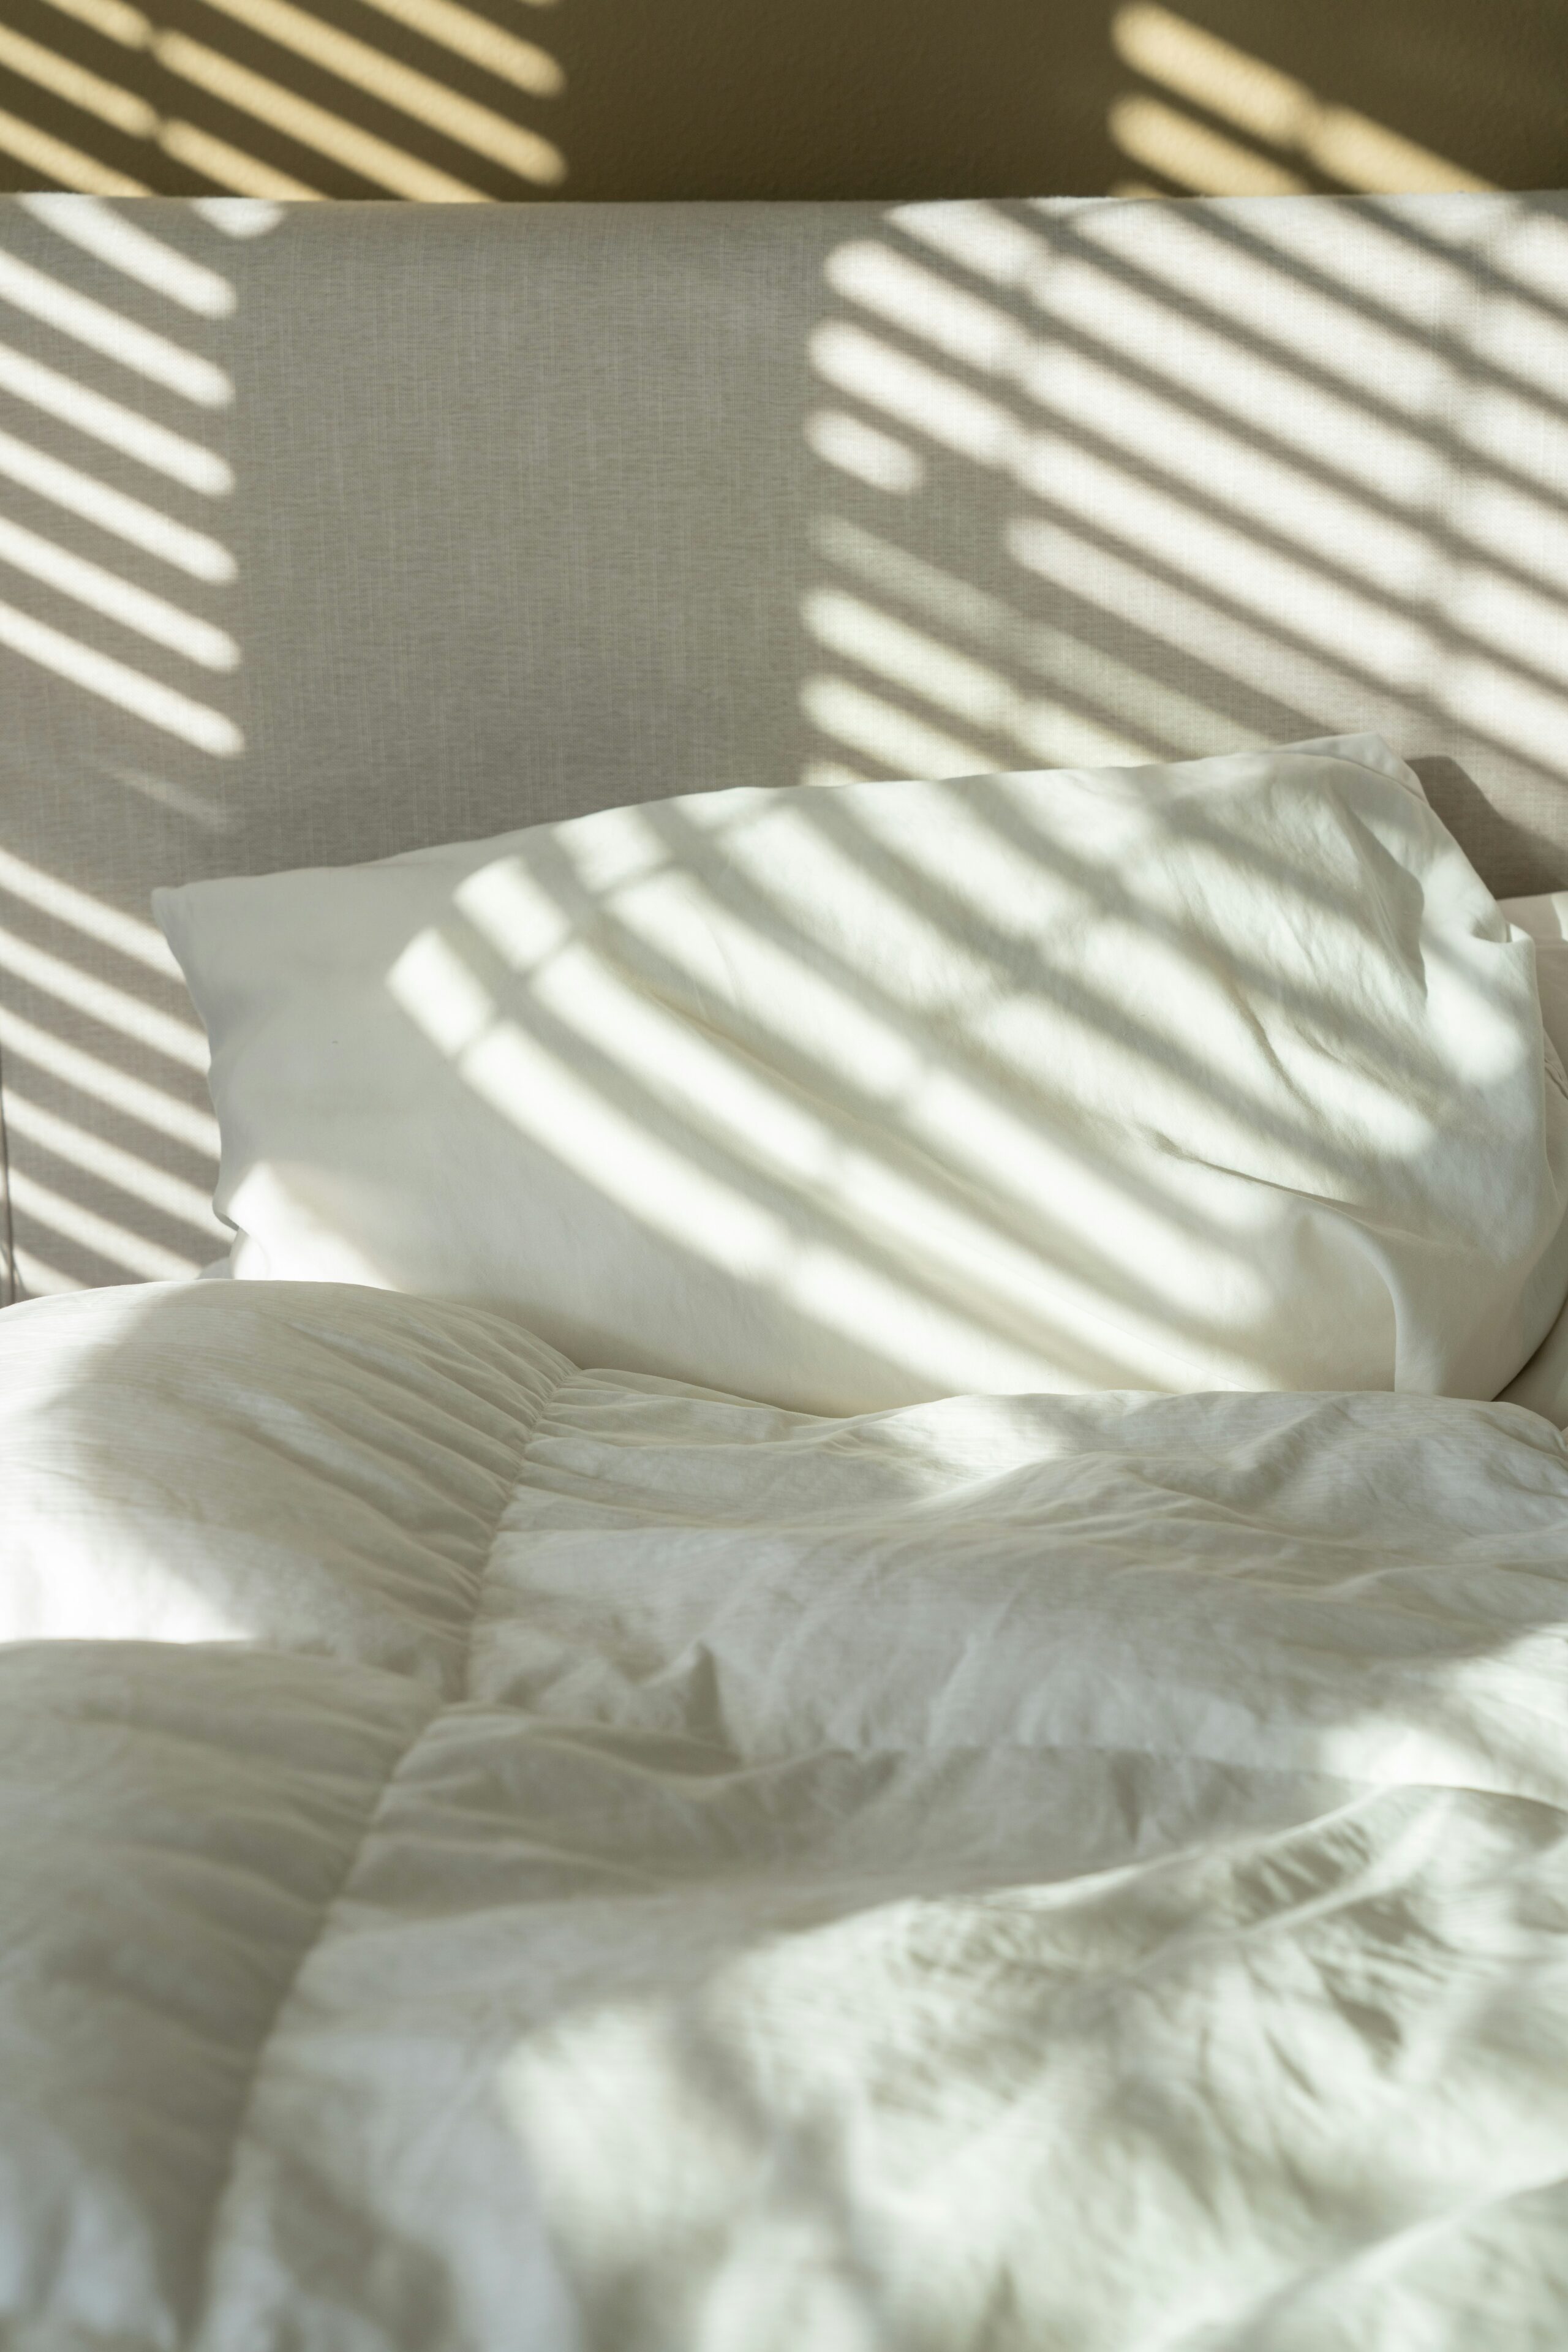 Close up shot of a slept-on bed with white sheets and a white comforters, with the shadows of windows blinds cascading over the bed.